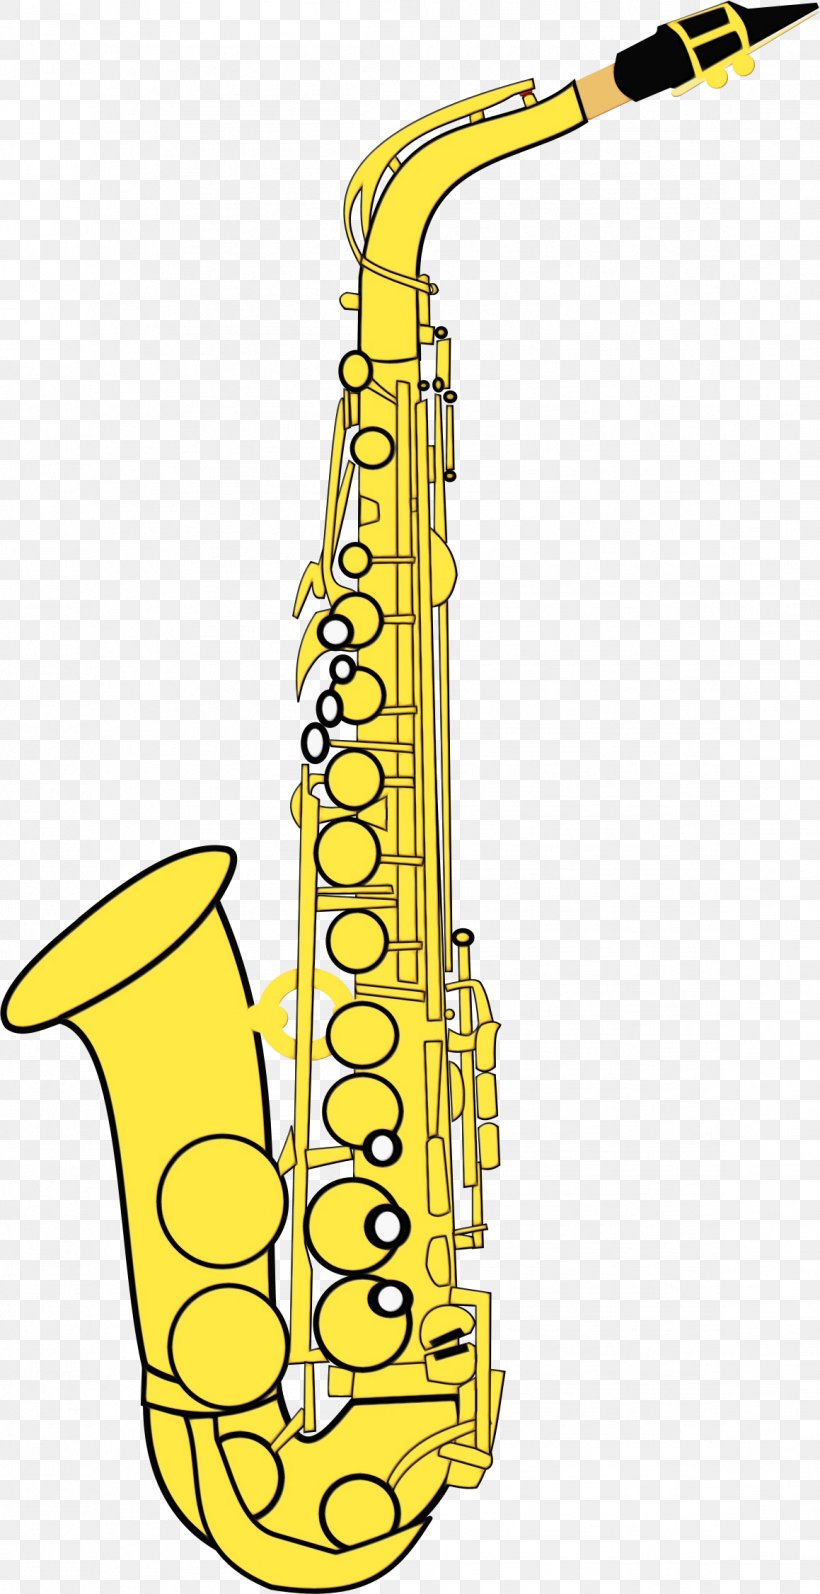 Clarinet Family Saxophone Woodwind Instrument Musical Instrument Reed Instrument, PNG, 1159x2253px, Watercolor, Bass Oboe, Clarinet, Clarinet Family, Indian Musical Instruments Download Free